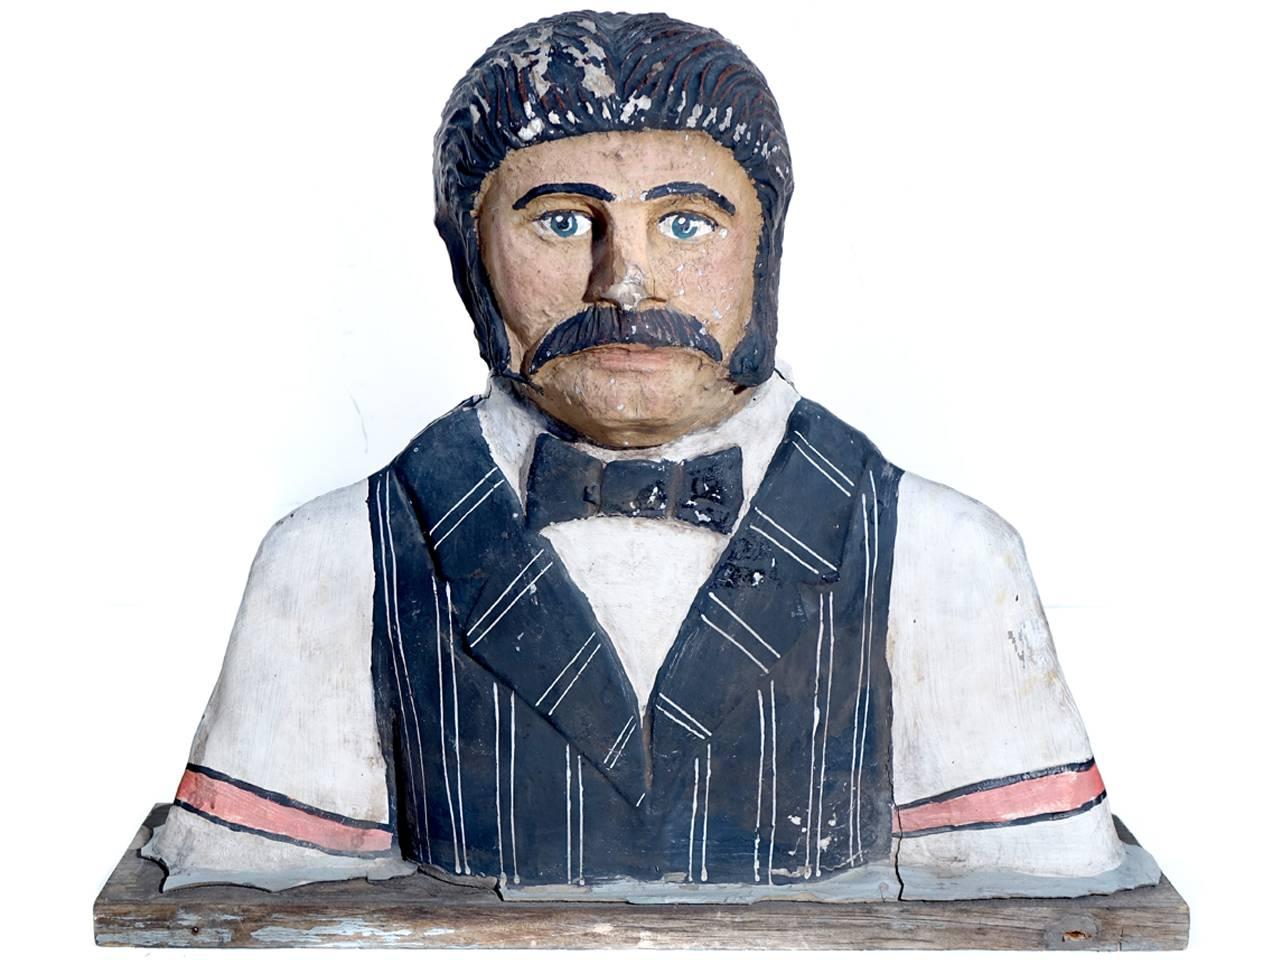 This life-sized character of a period bar tender was mounted outside on top of the saloons main sign. It's two sided with heads facing both ways. It's spent many years outside and has nice age with a weathered patina. A great piece of Folk Art.